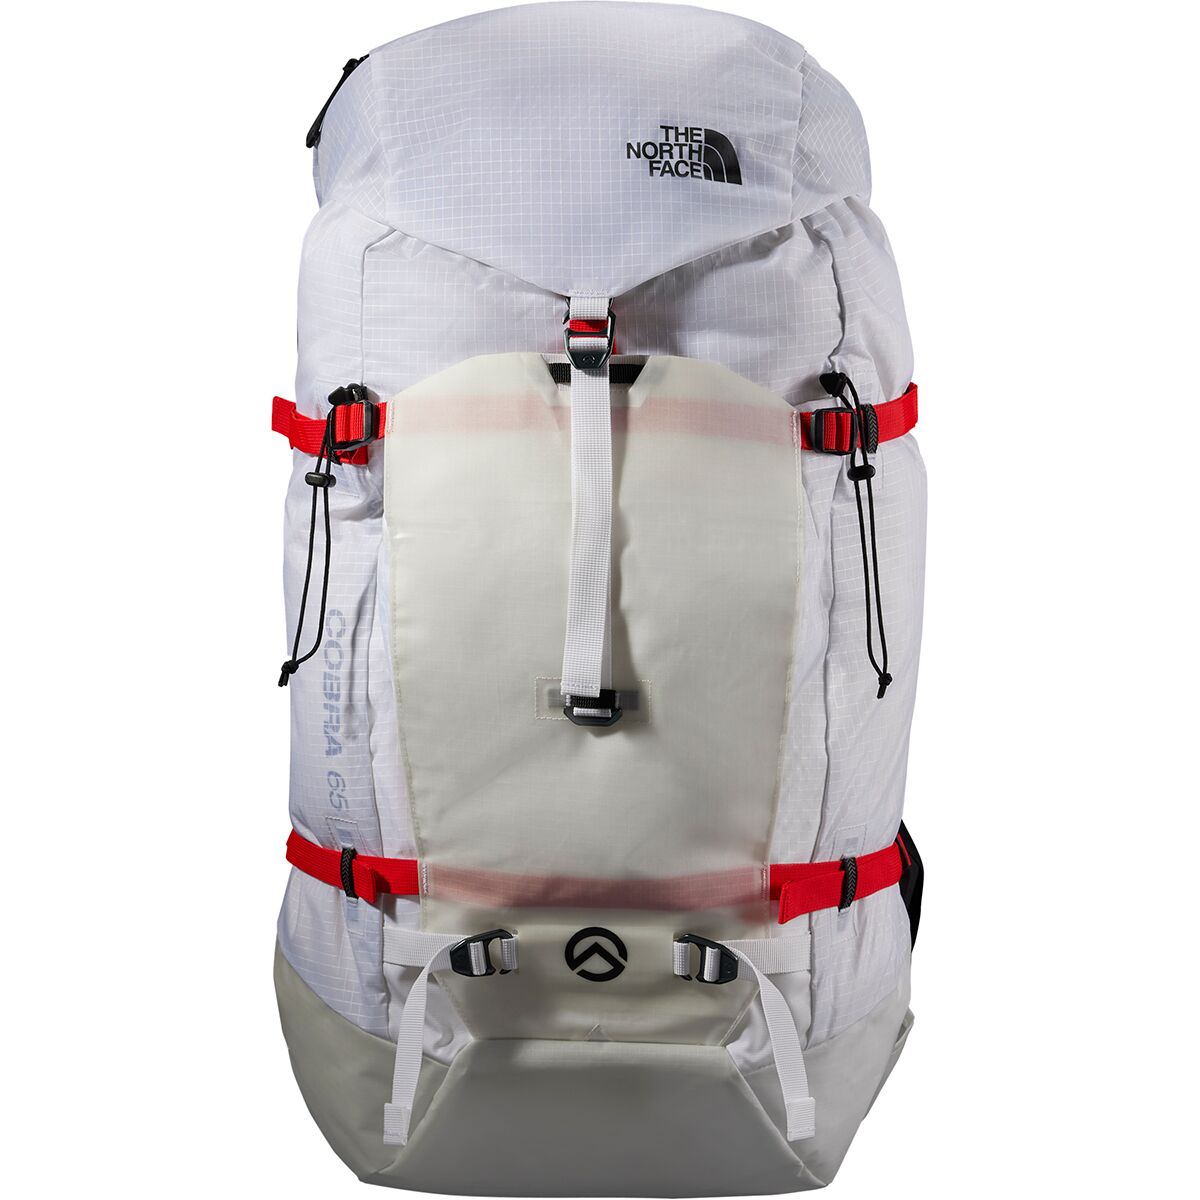 The North Face Cobra 65L Backpack